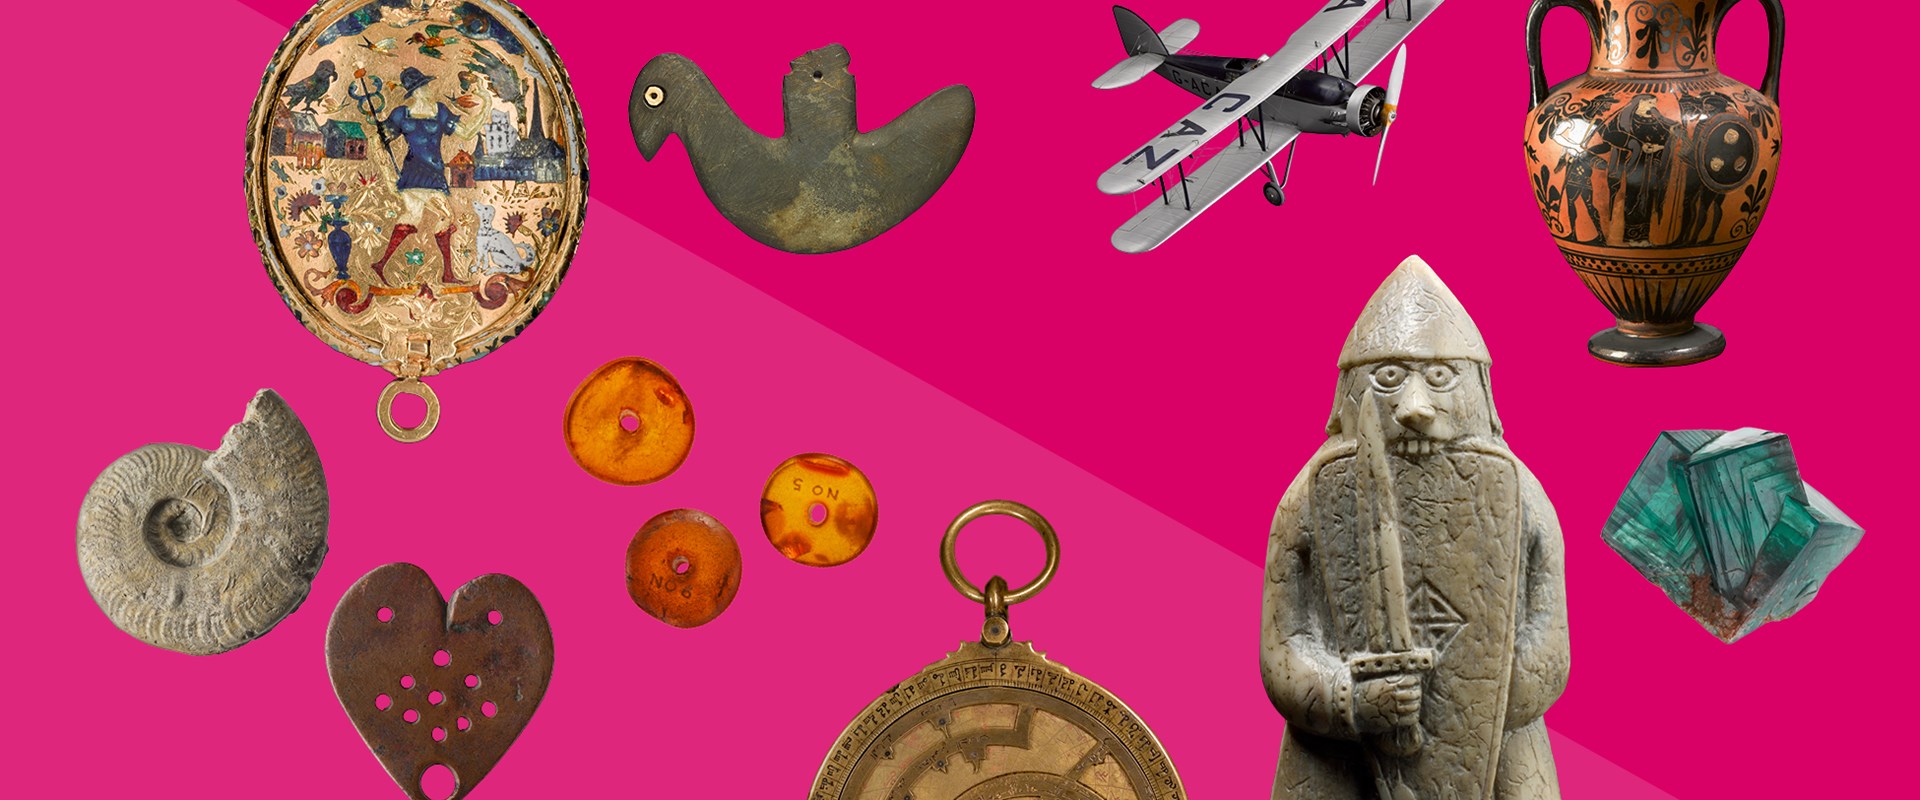 Some of the key objects from the collections at National Museums Scotland scattered over a pink background.